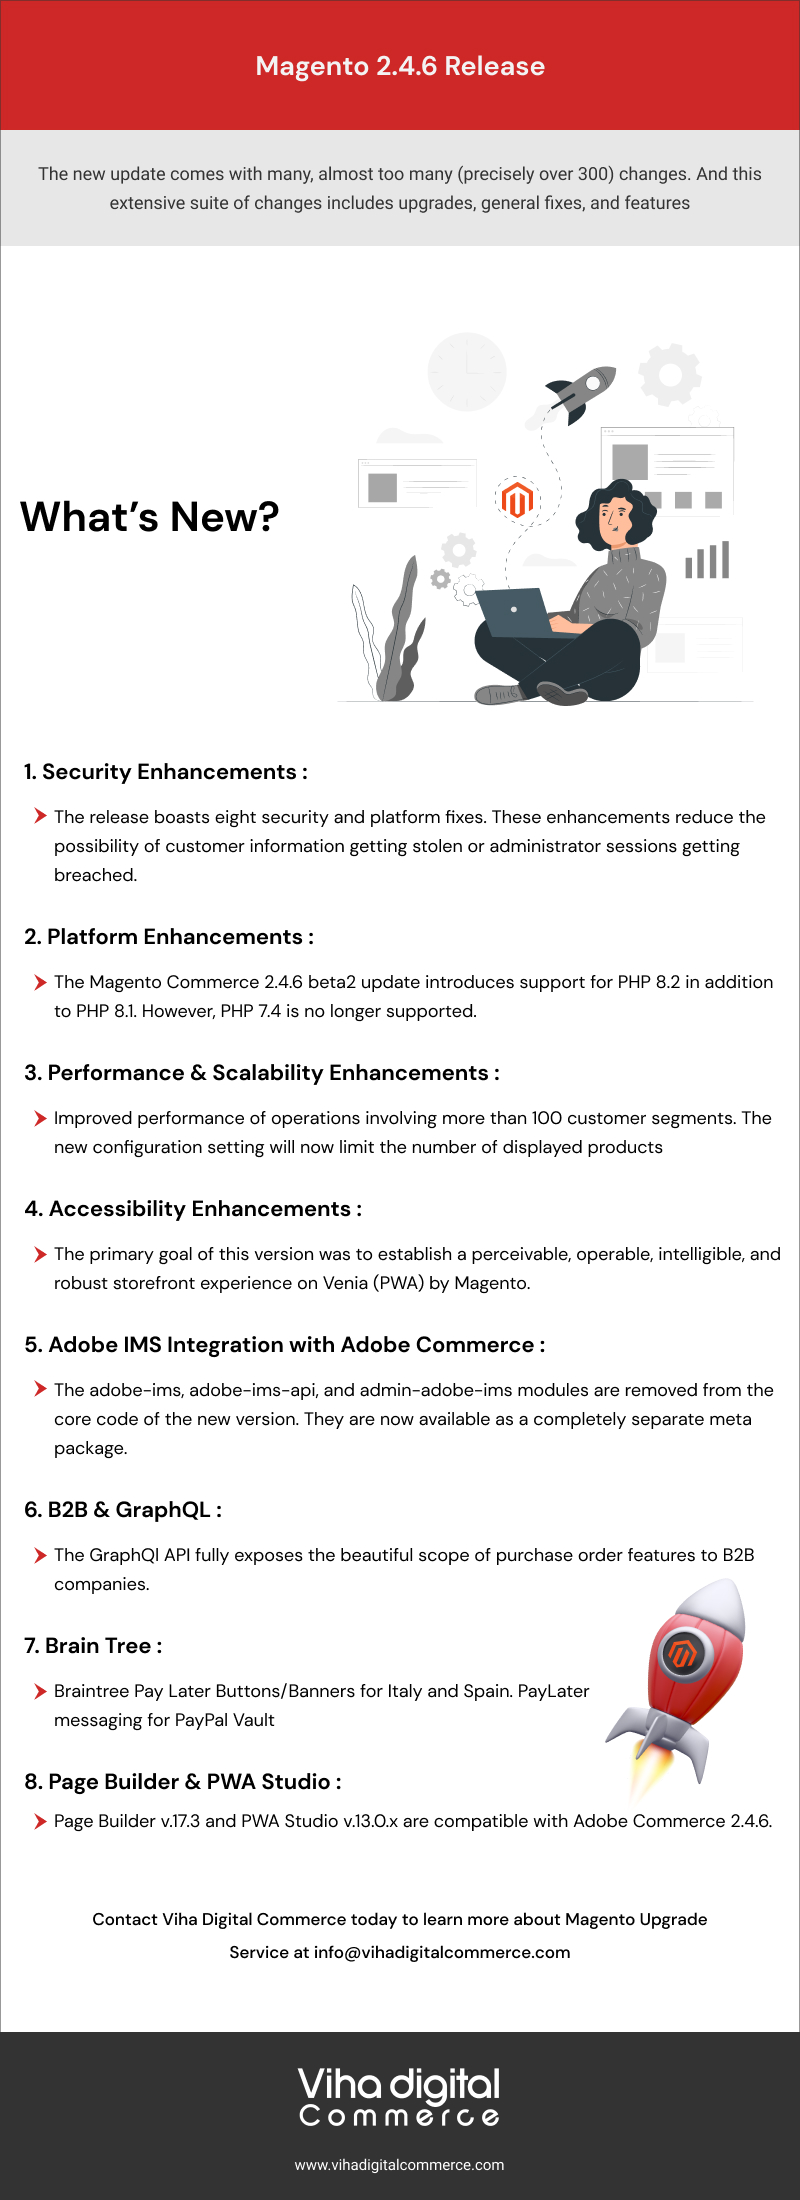 Magento 2.4.6 Release note infographic